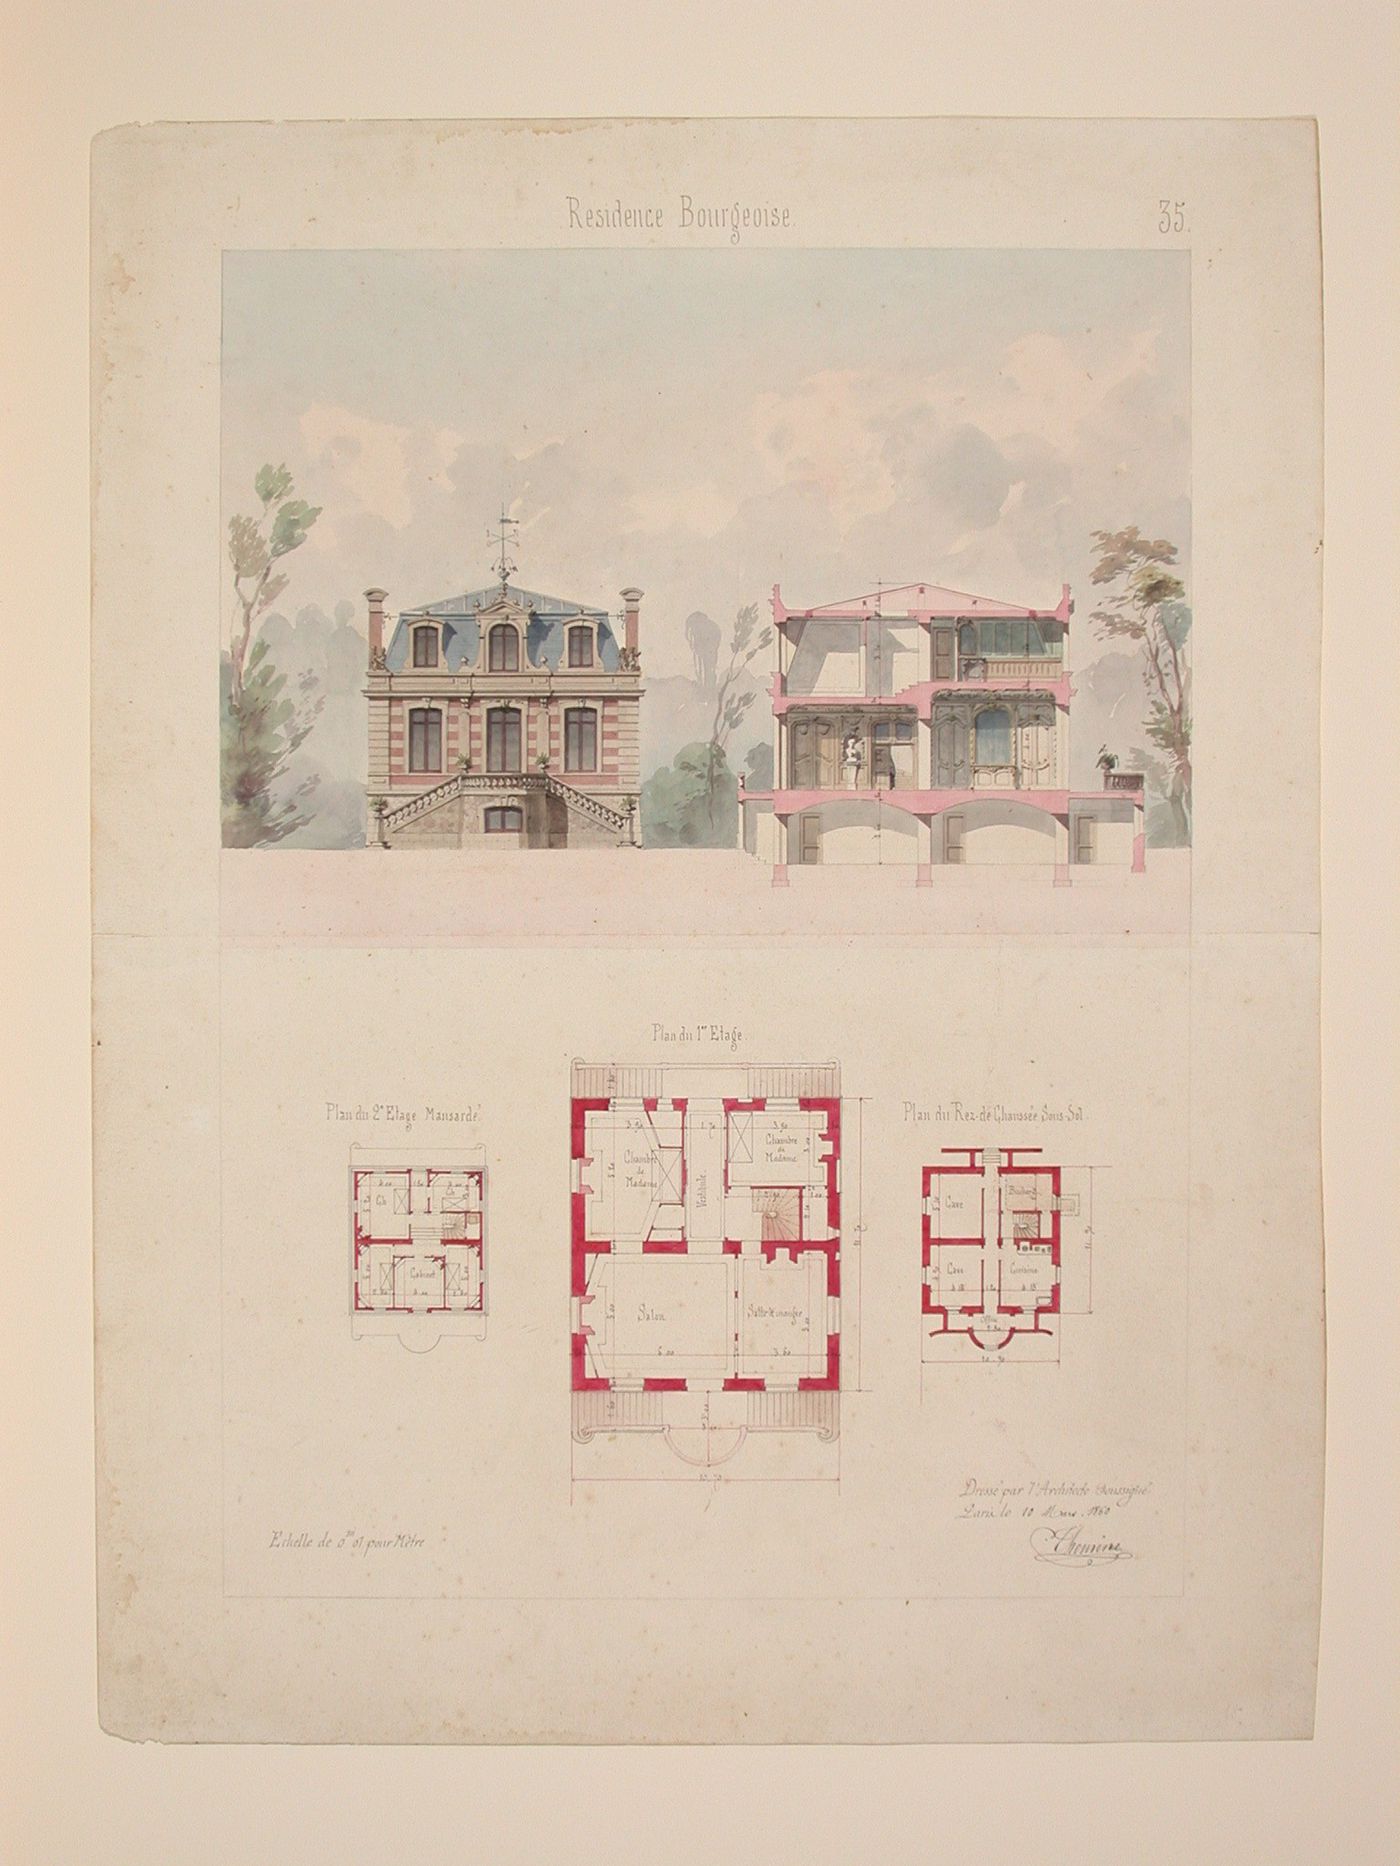 Rendered elevation and plans for a country house in a French revival style